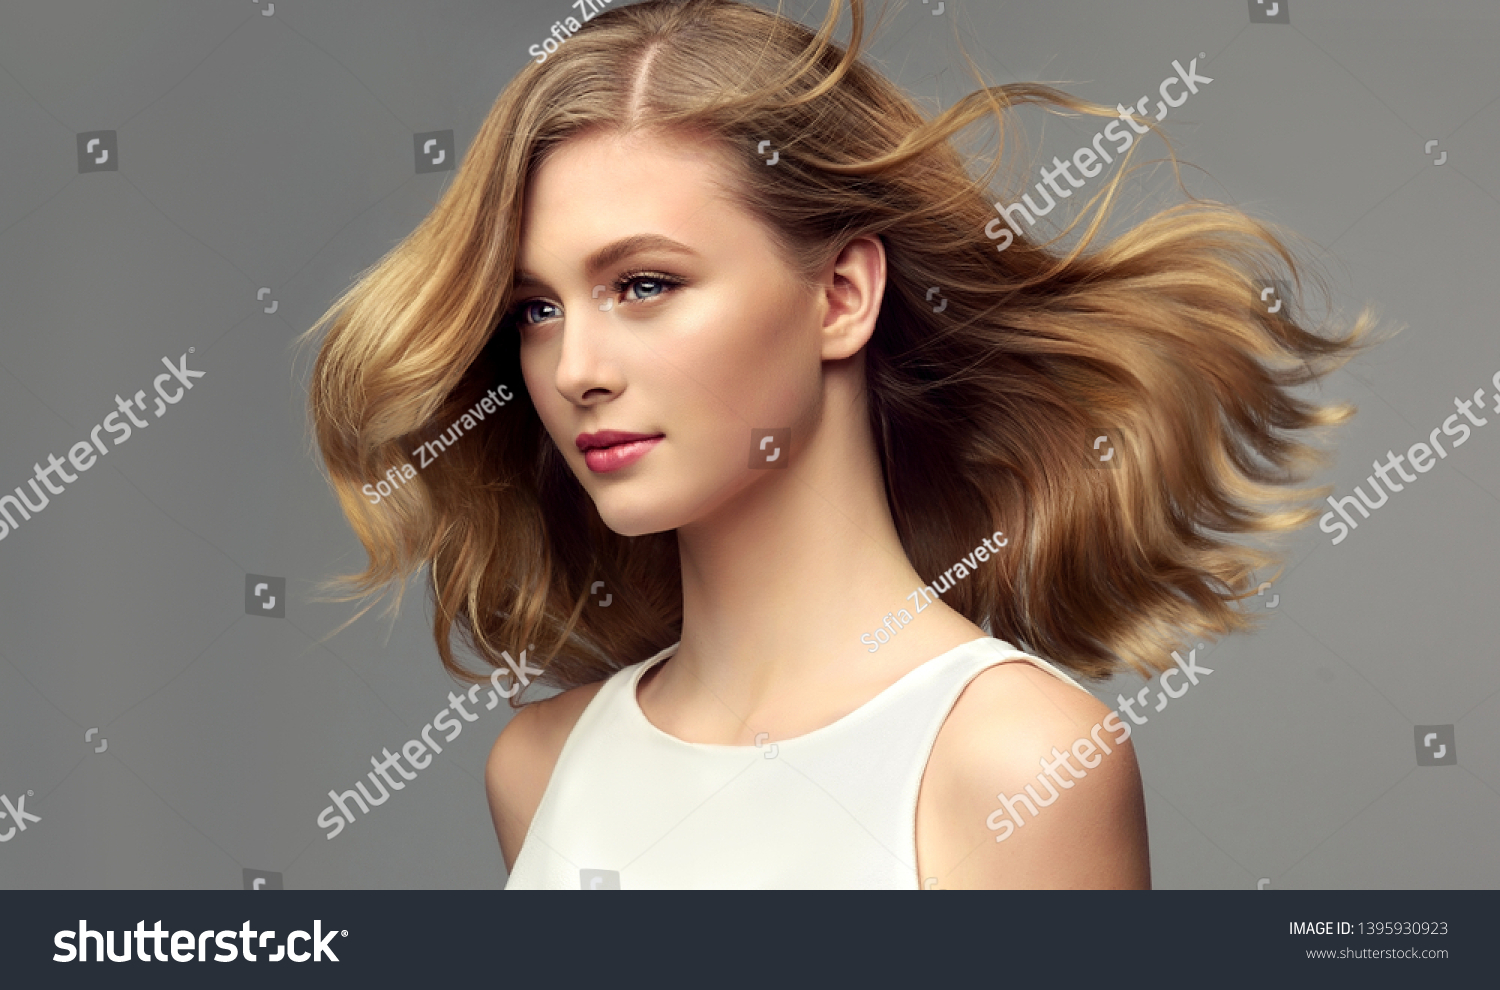 Blonde woman with curly beautiful hair  on gray background. The girl with a pleasant smile. Short haircut . Bob hairstyle
 #1395930923